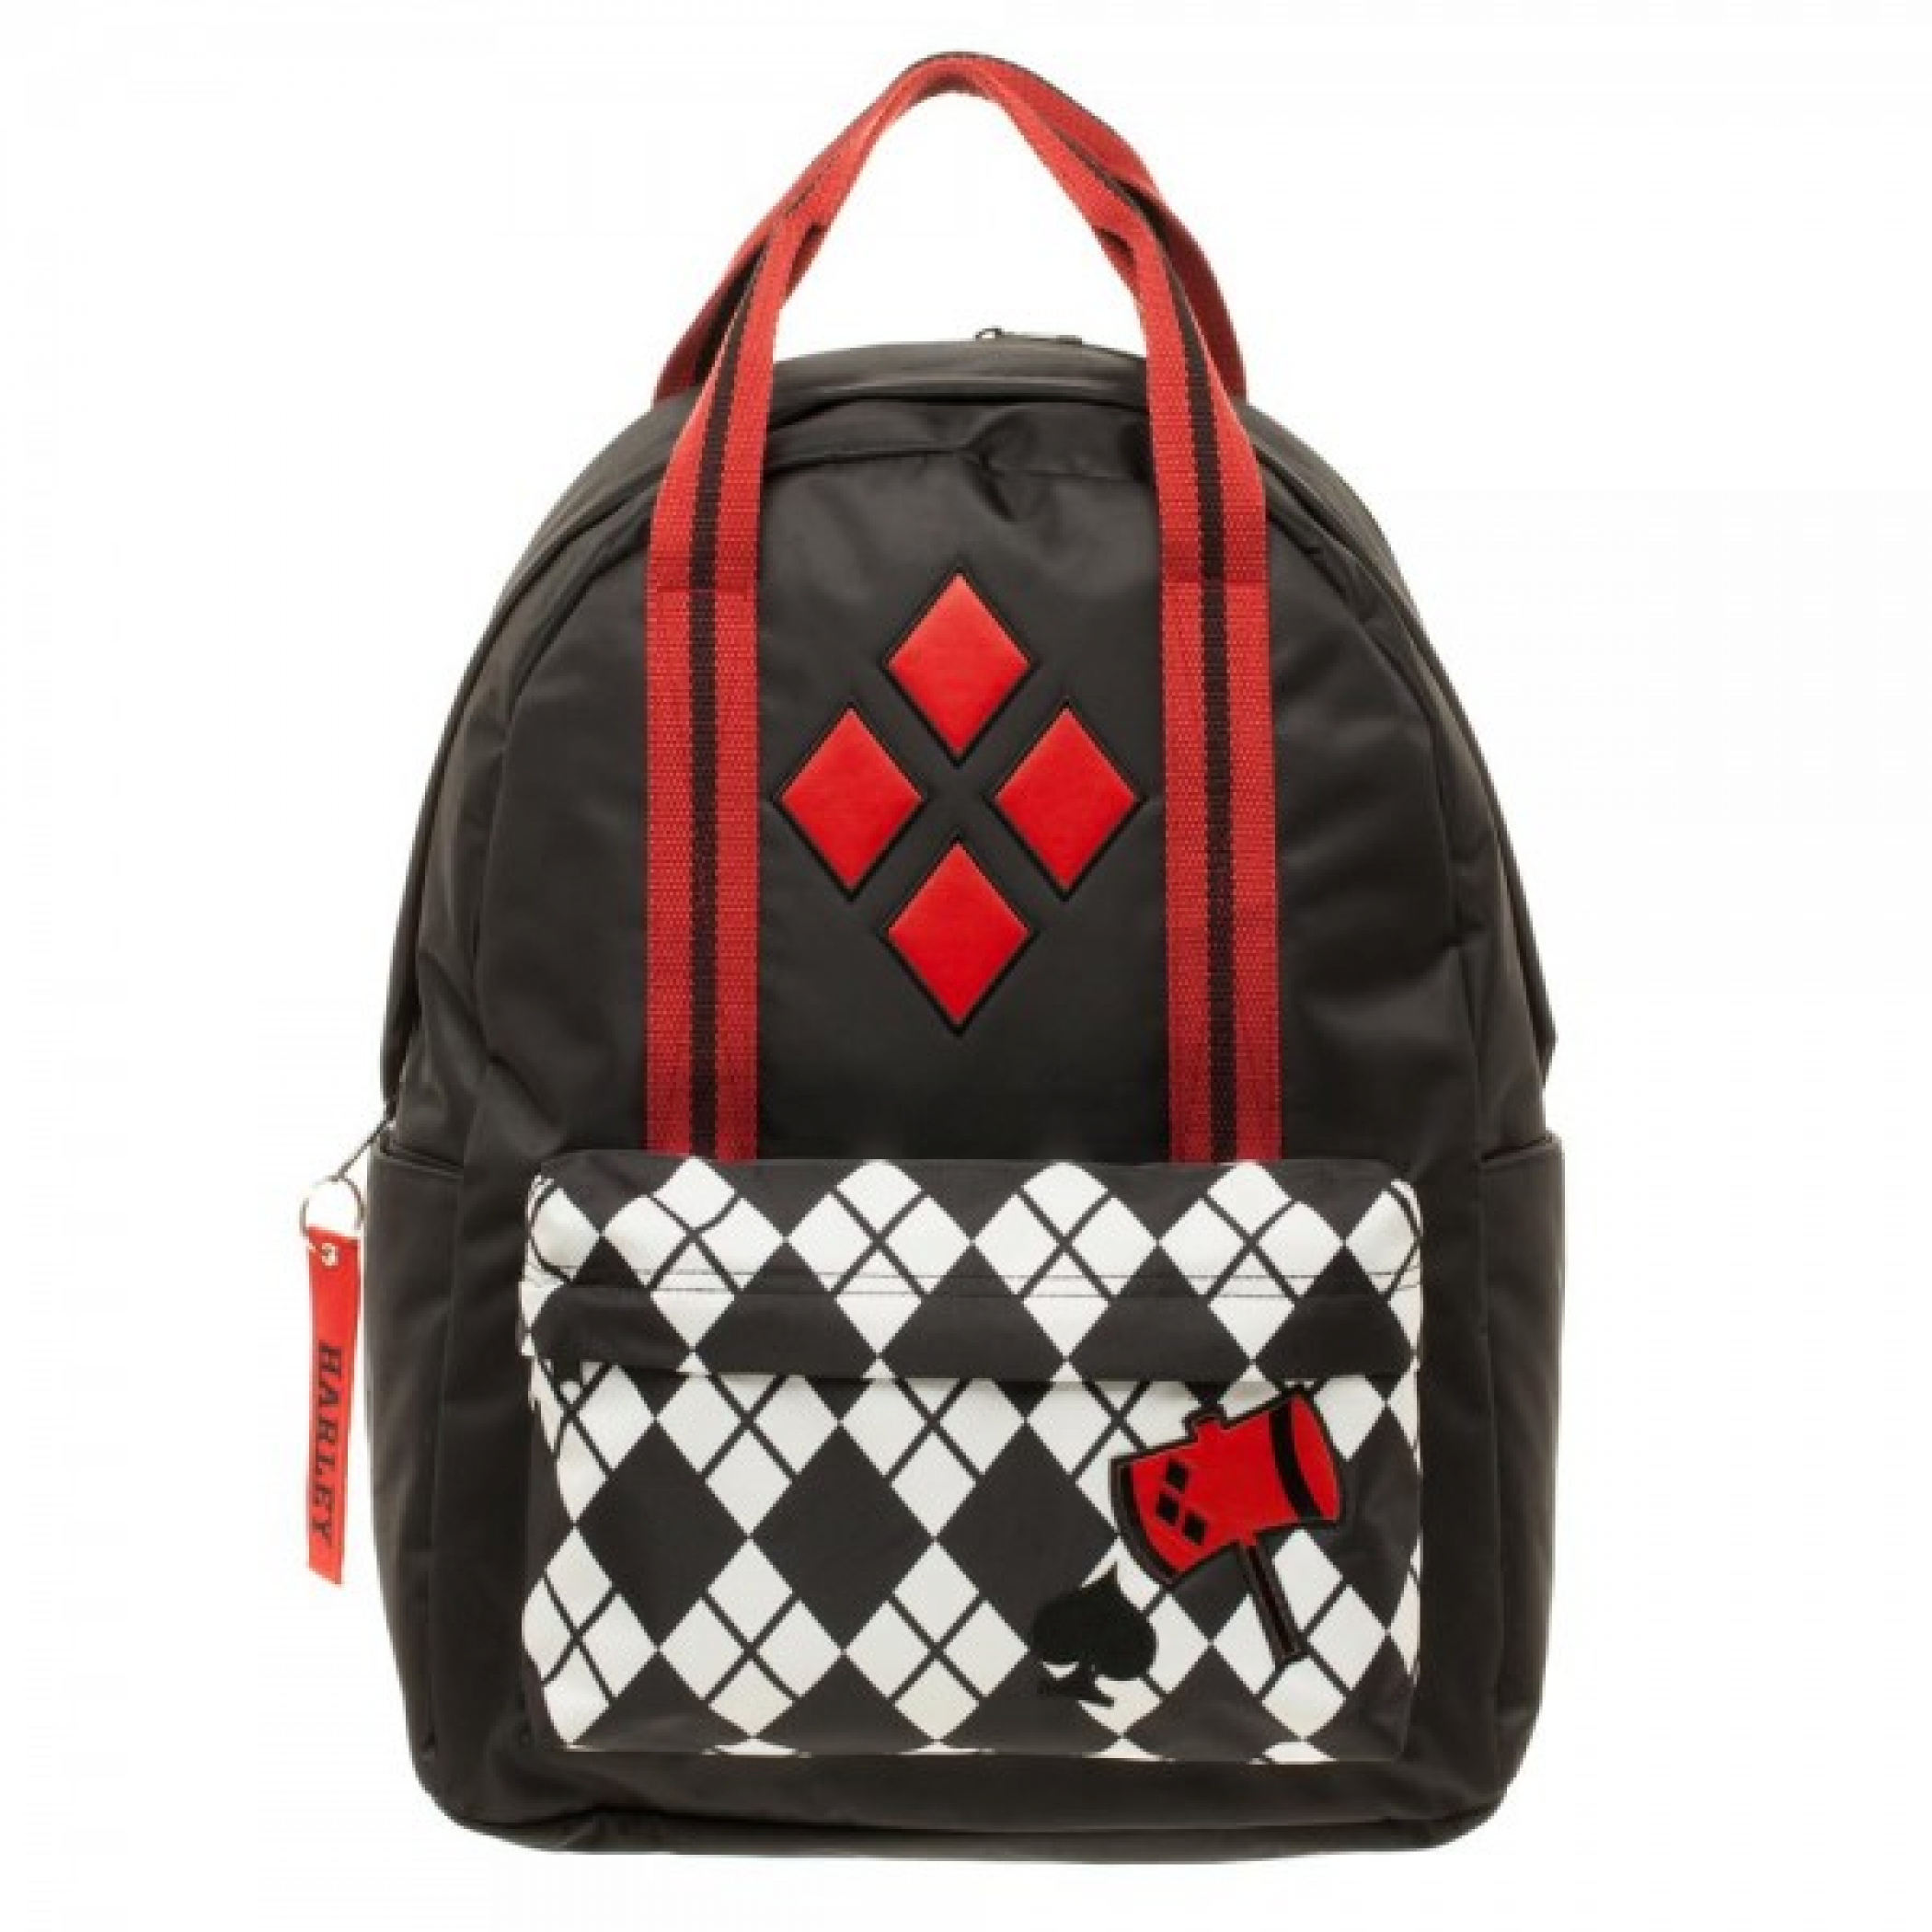 The Suicide Squad Harley Quinn DC Comics Diamonds Pocket Backpack